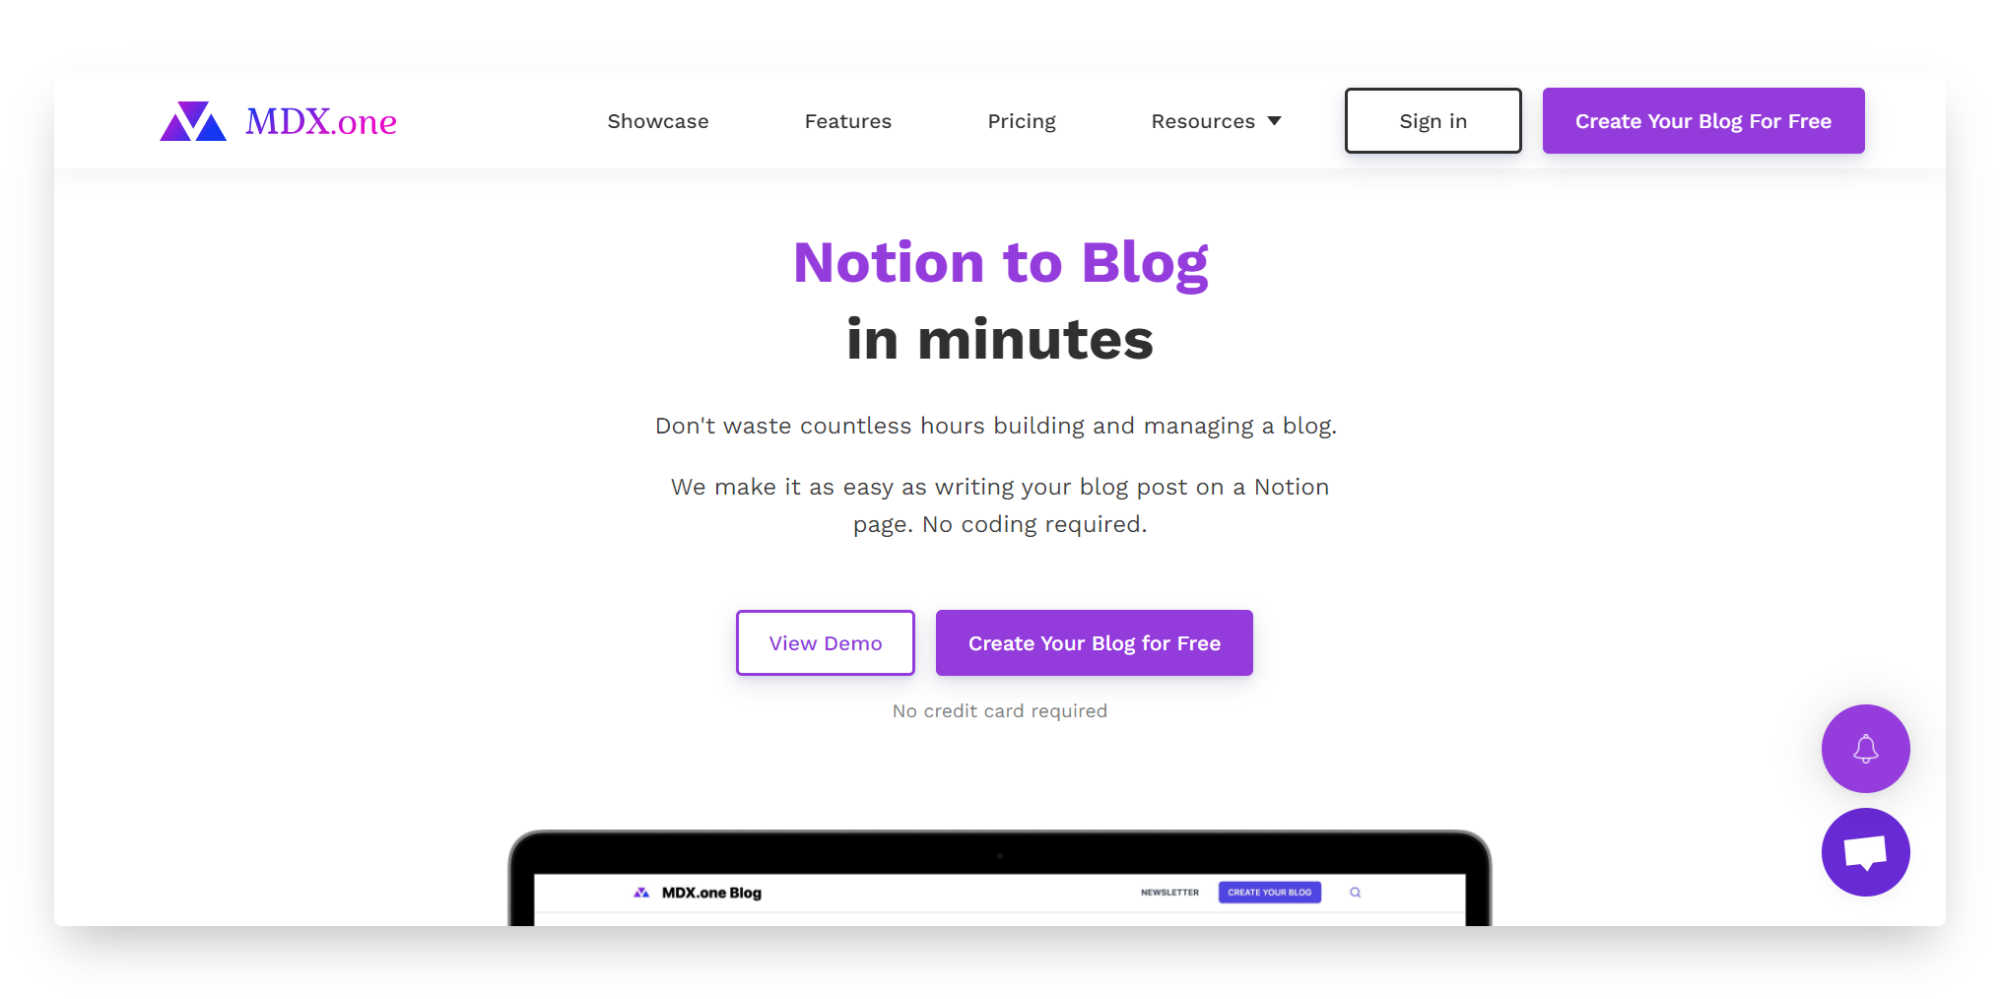 MDX: Notion to Blog in minutes! ✍🏻